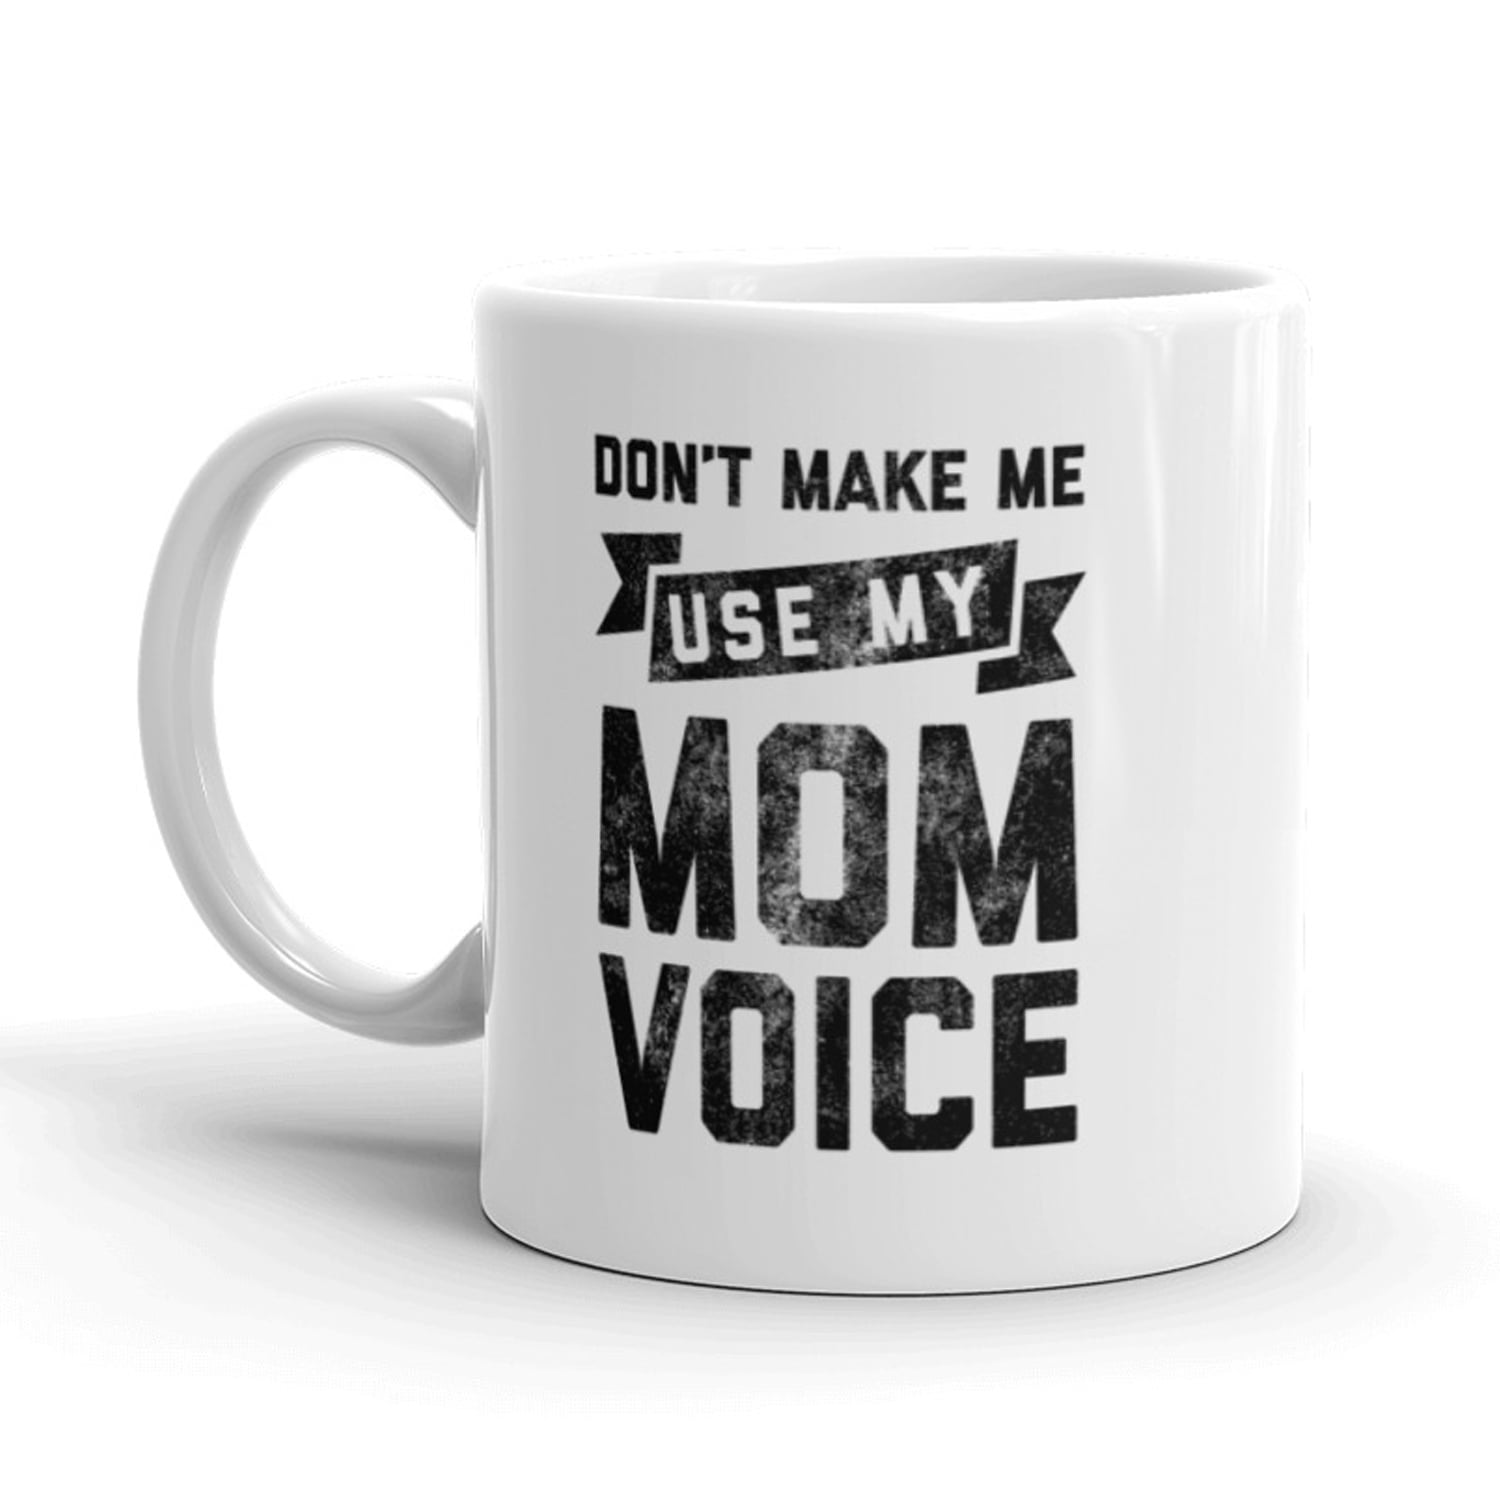 My Favorite Child Gave Me This Funny Coffee Mug - Best Mom & Dad Chris –  Wittsy Glassware